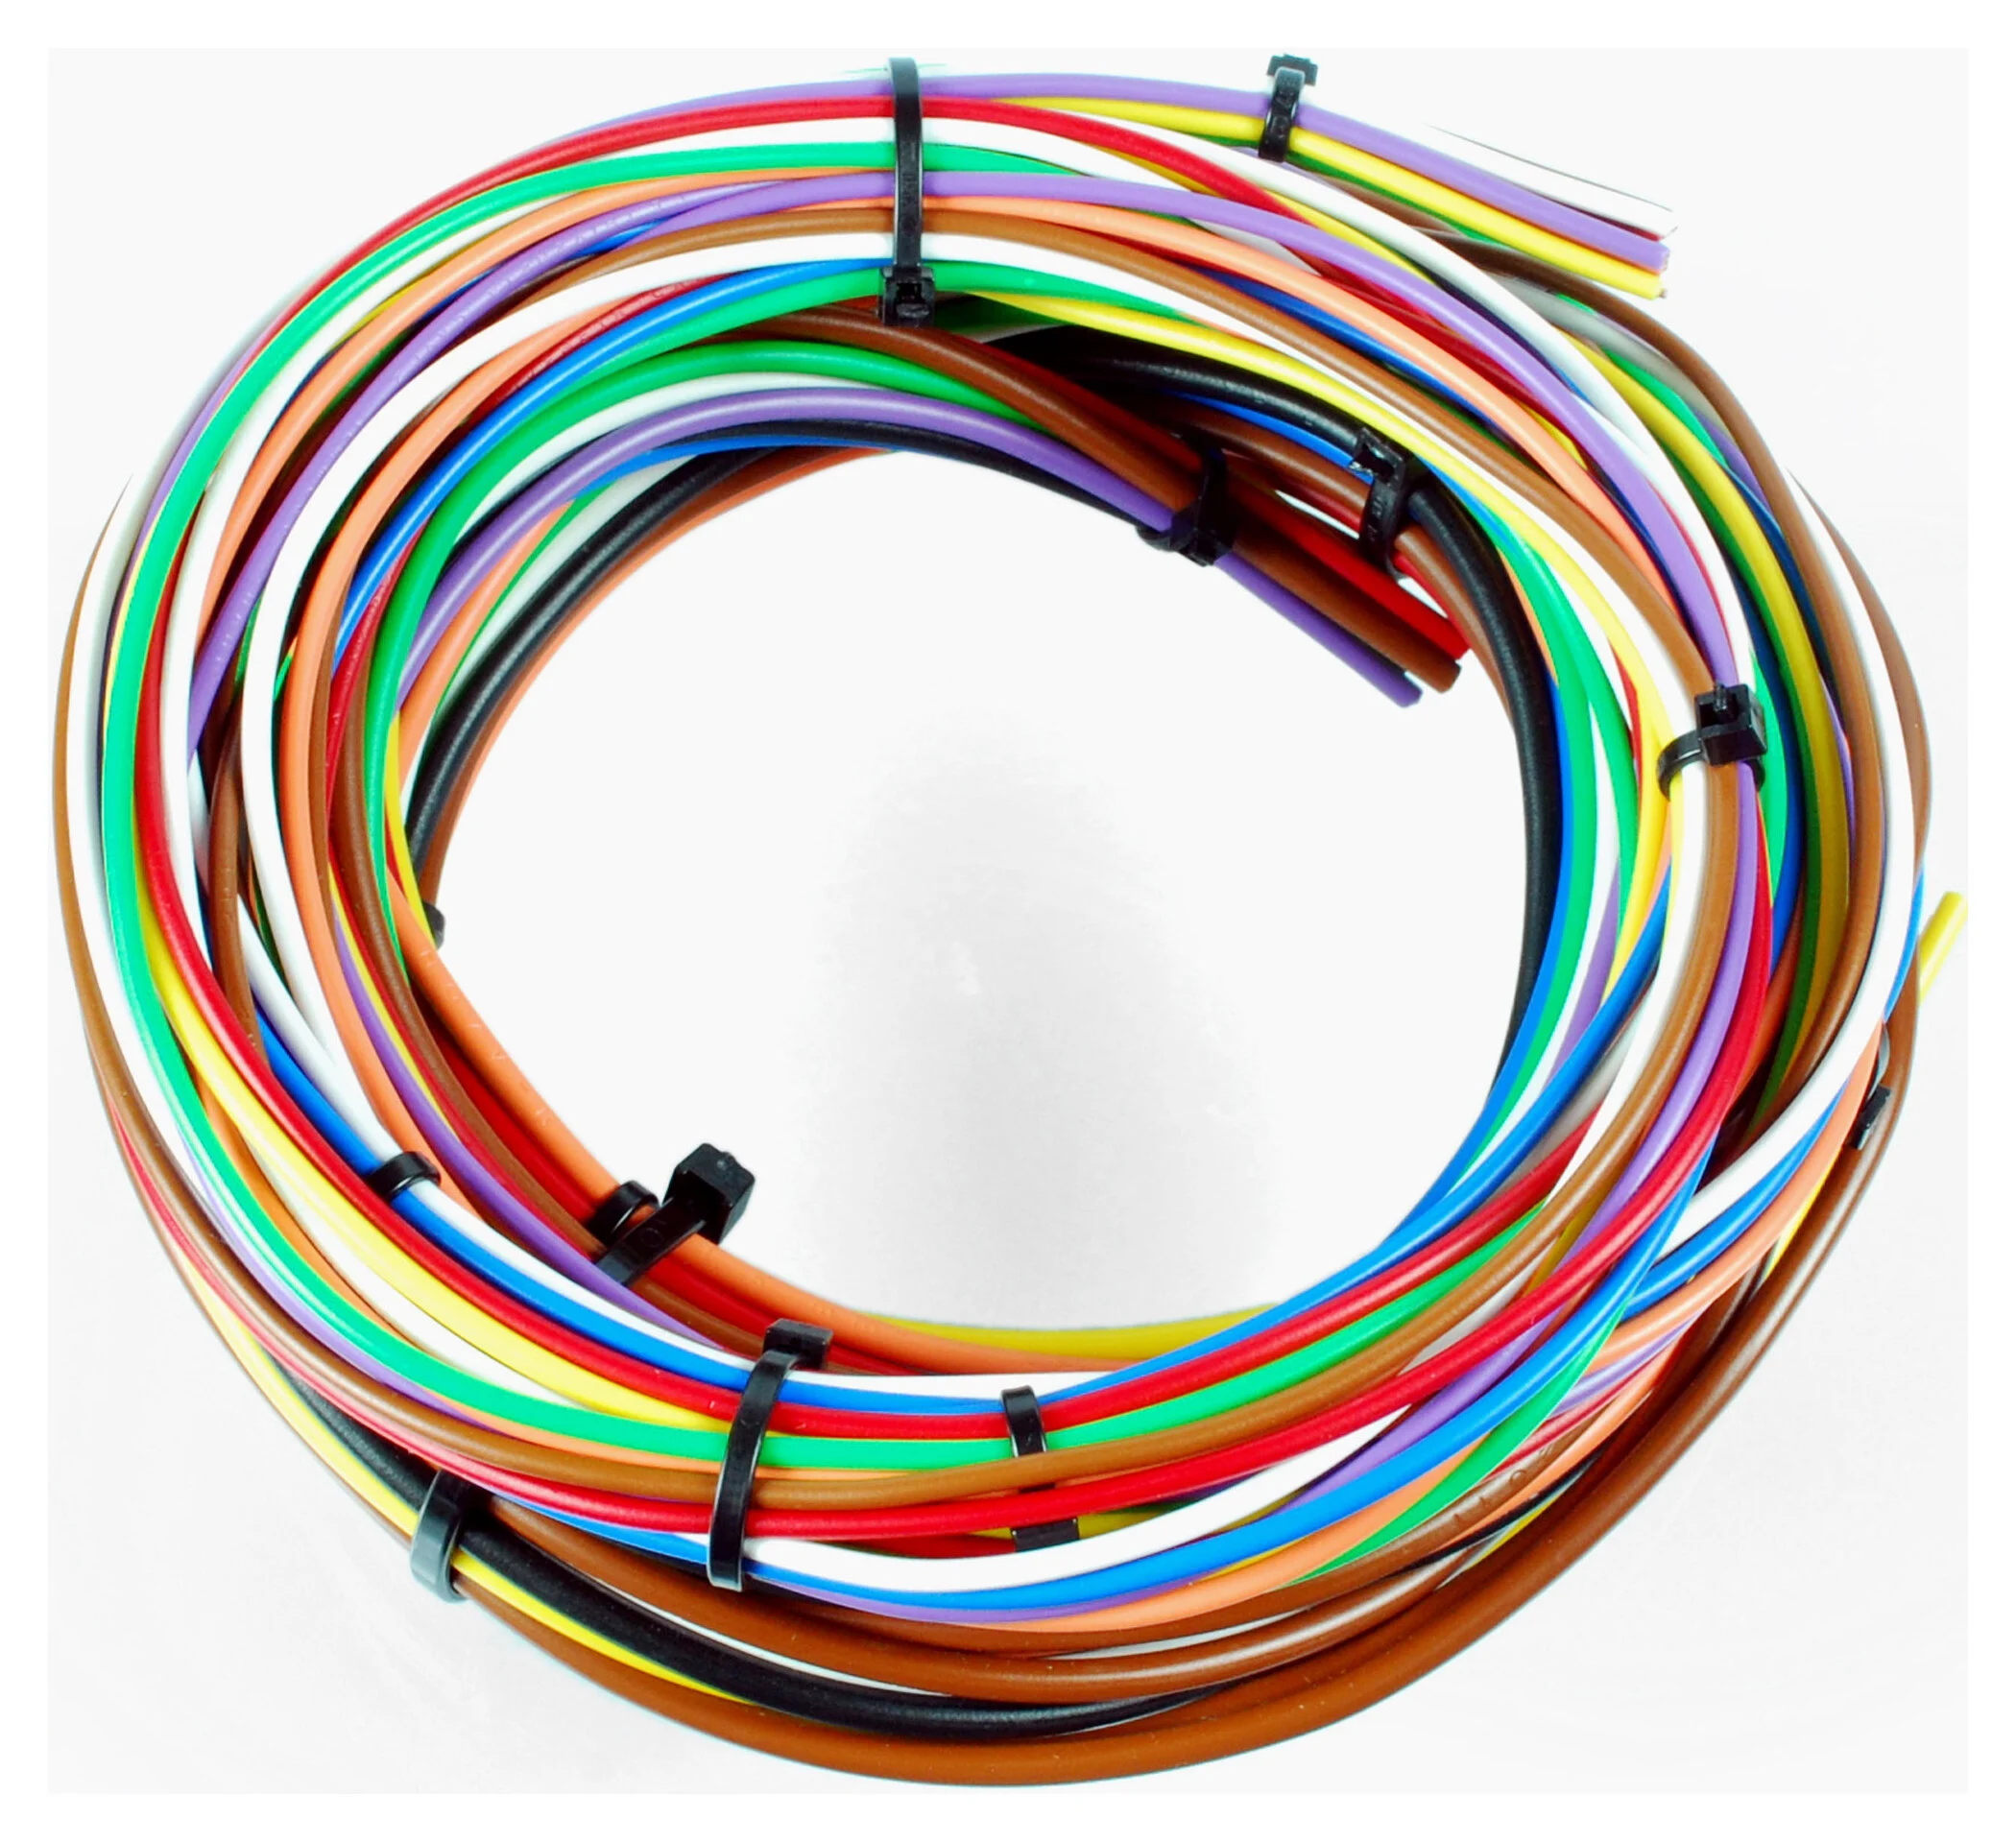 MOTOGADGET CABLE KIT FOR